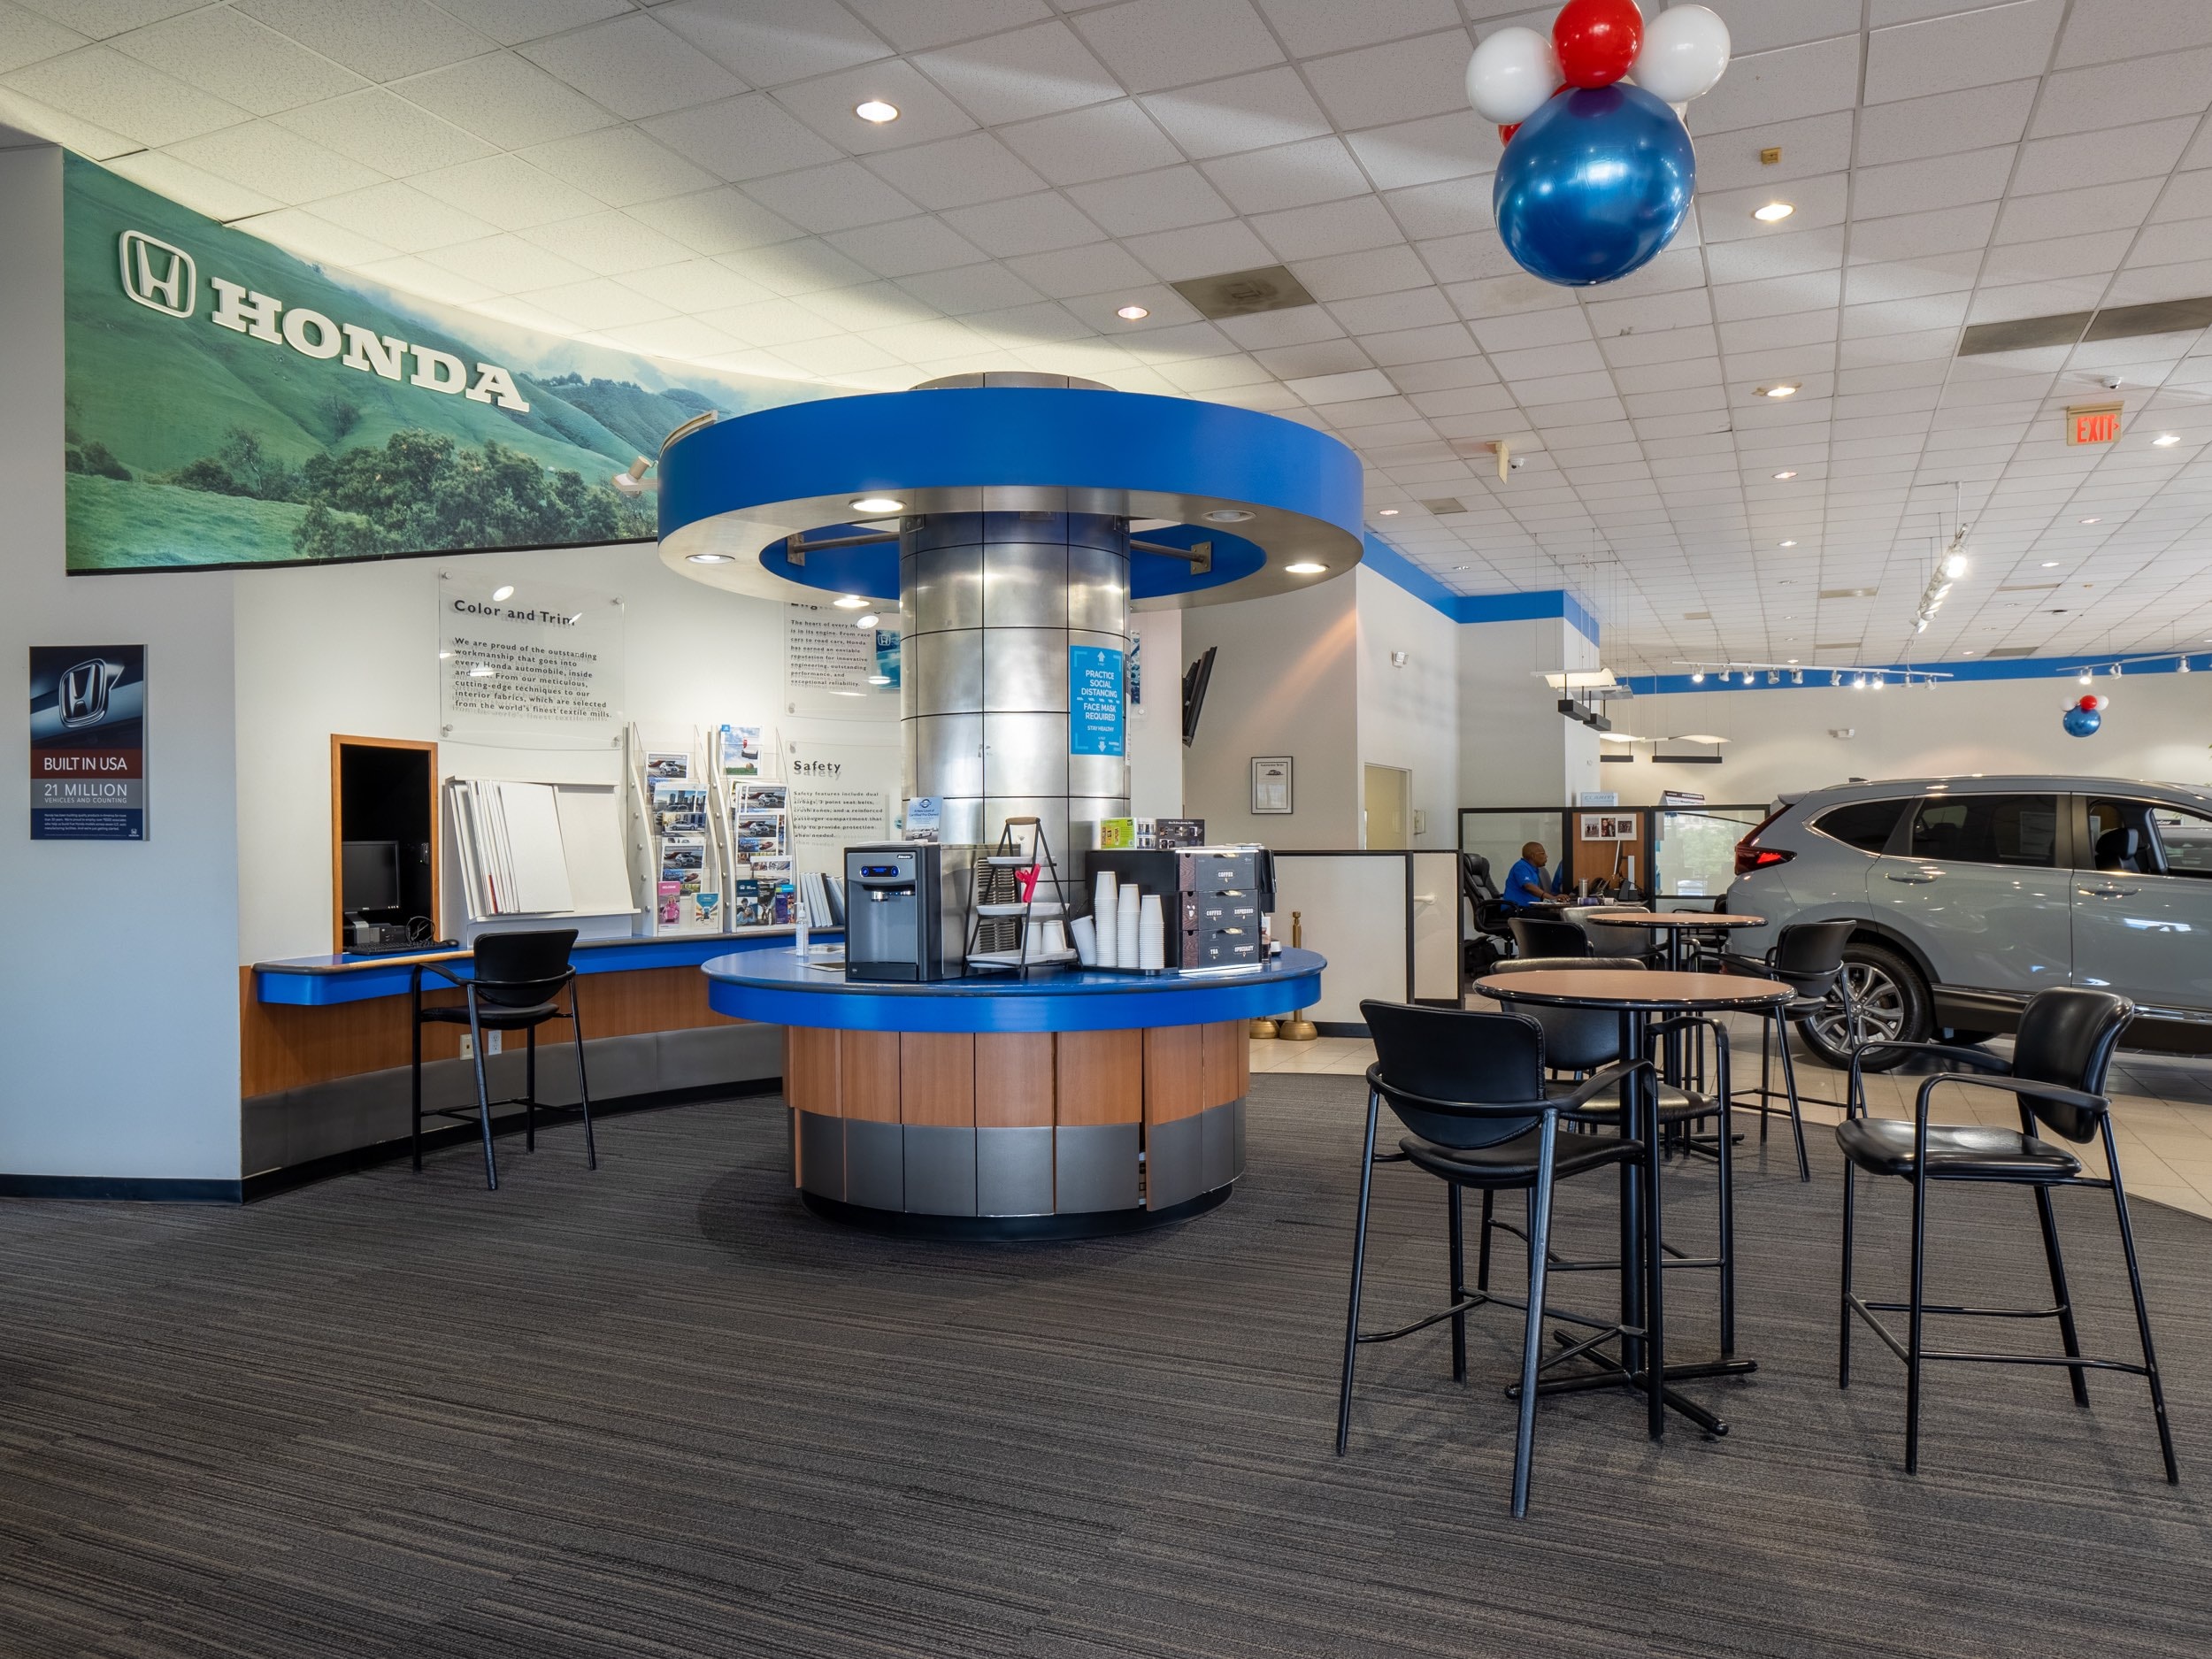 Interior view of AutoNation Honda 104, centered on a table with chairs.